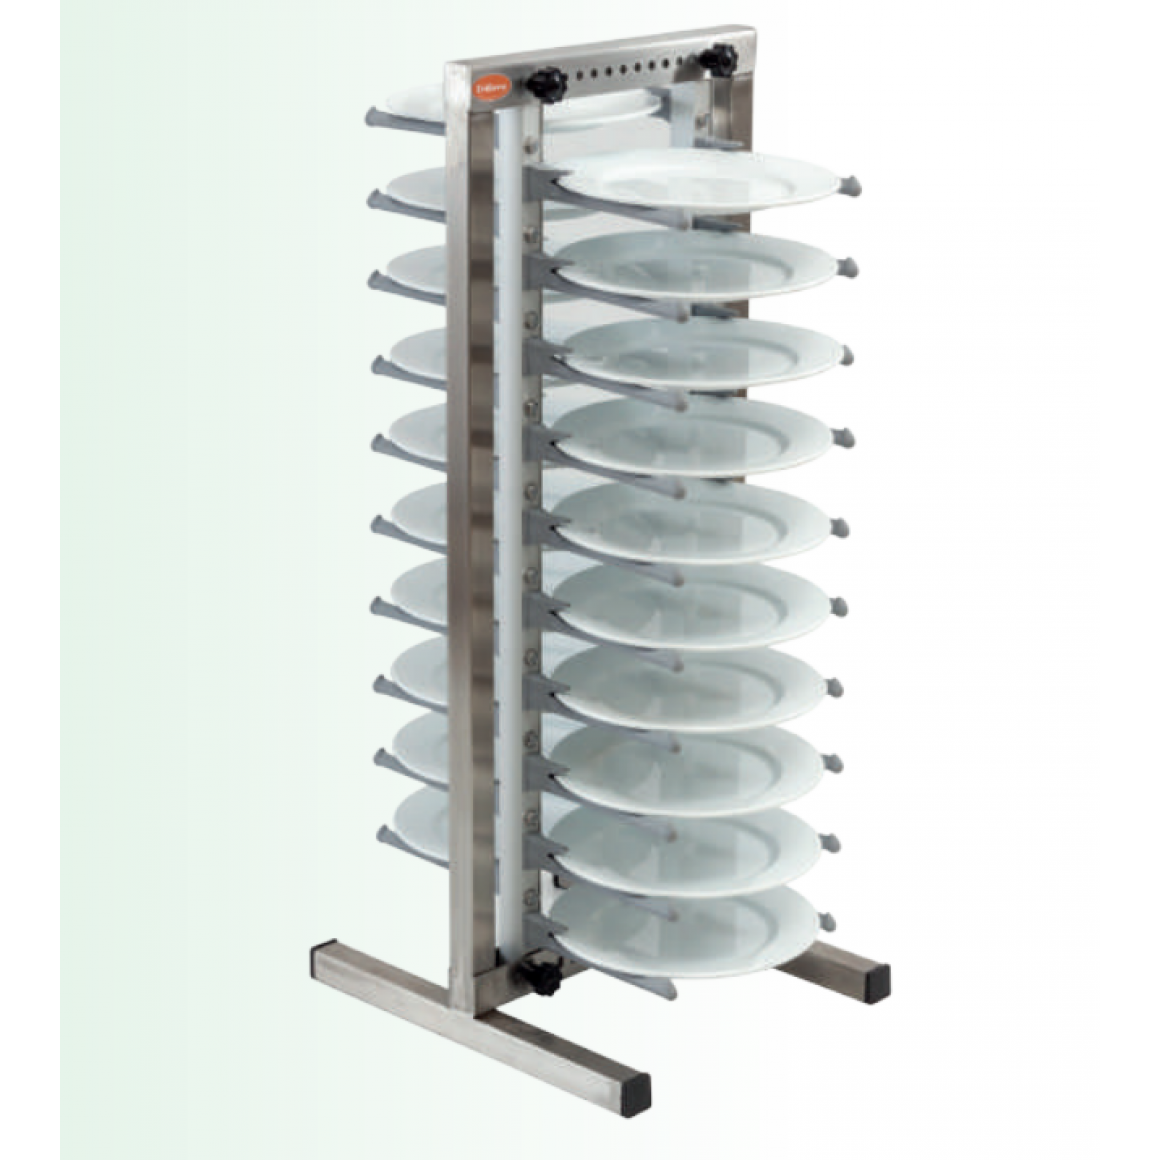 Plate Stacking Trolley ( 20 pcs. Plates )